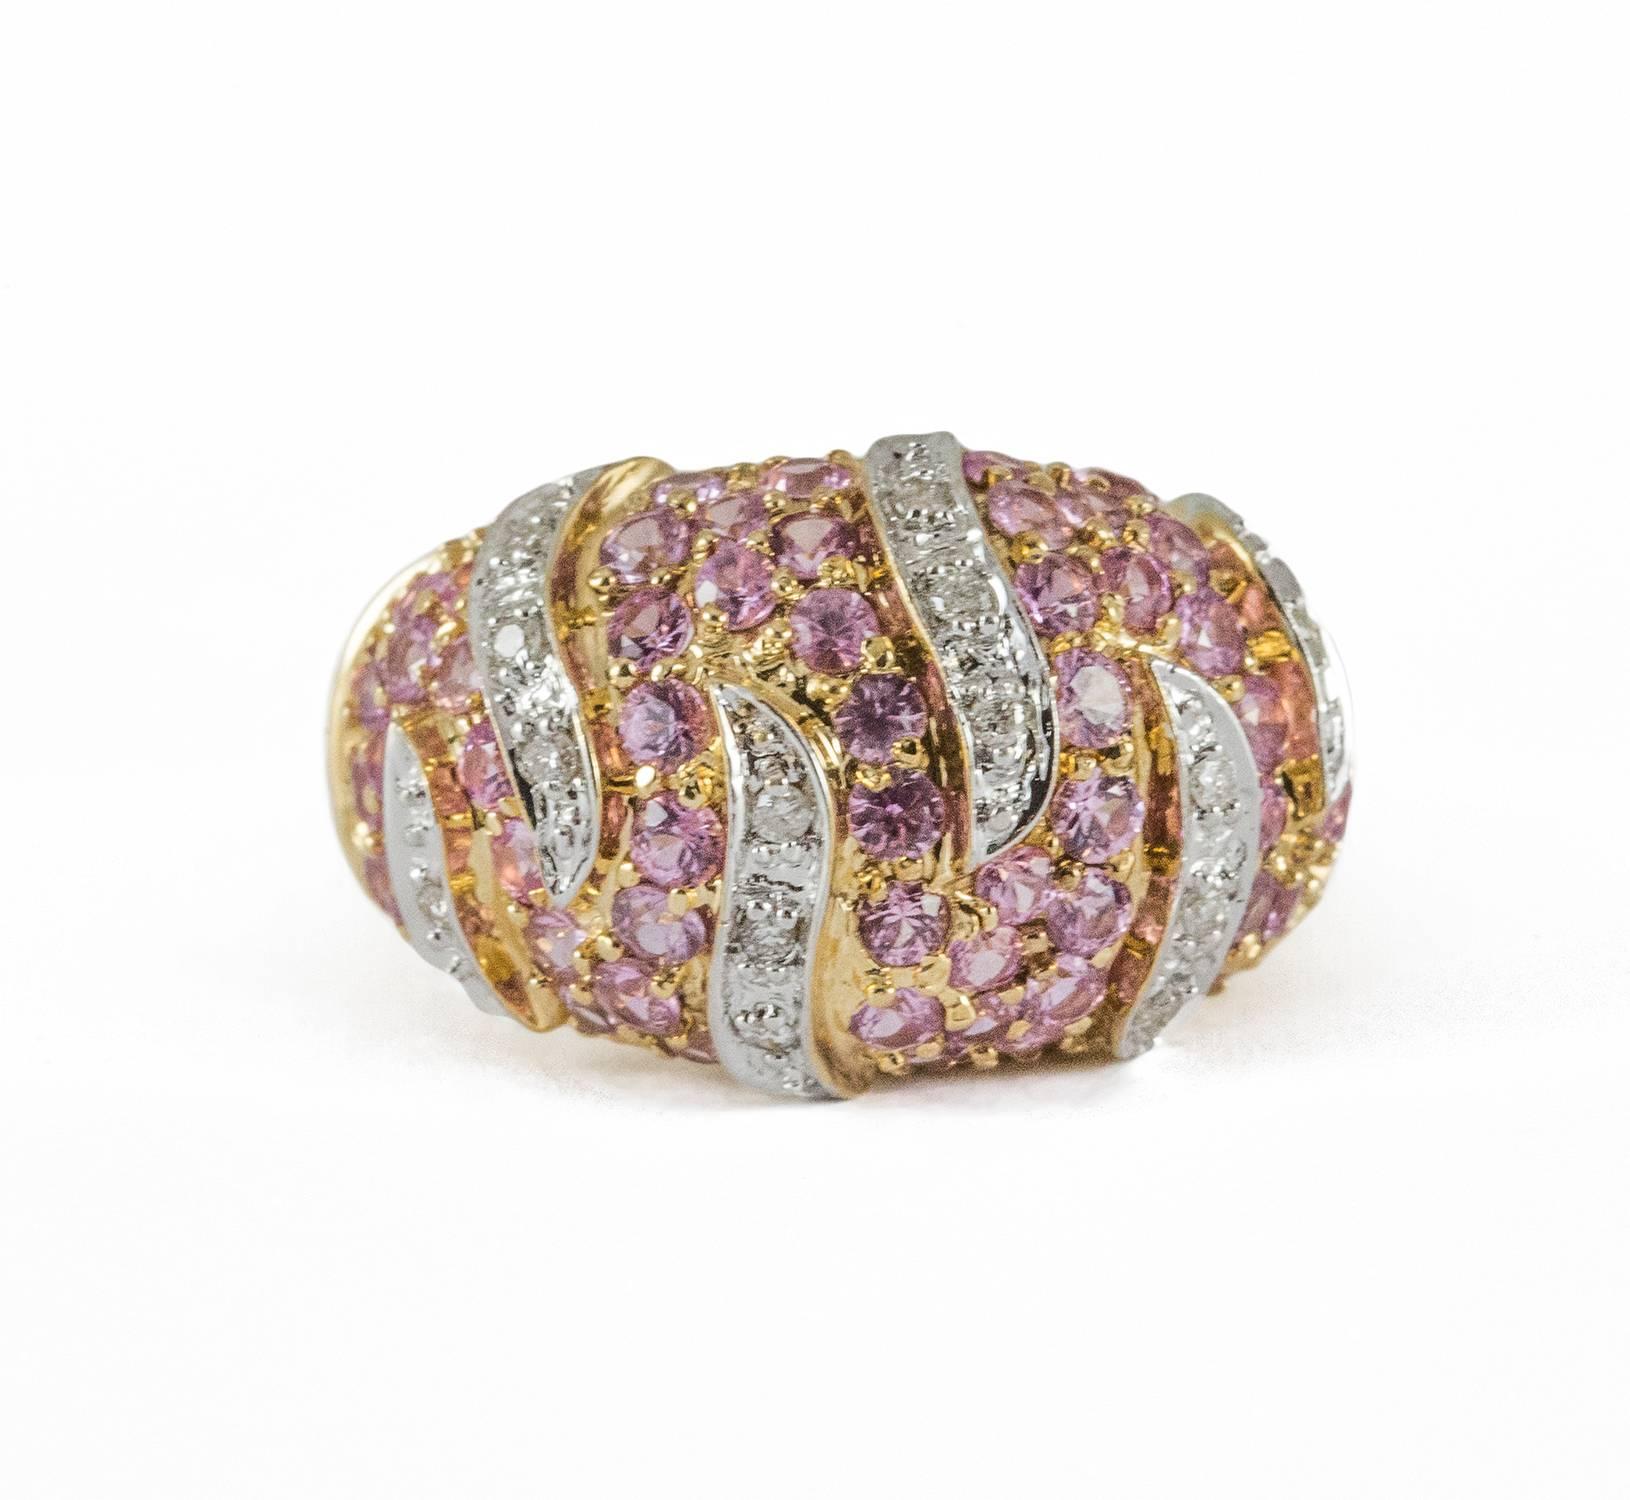 A 14kt yellow and white gold contemporary dome ring set with 61 pink sapphires and 14 round brilliant cut diamonds. The sapphires and diamonds are bead set with the sapphires totaling 3.90 ct. and the diamonds totalling .17 ct. This ring is dramatic